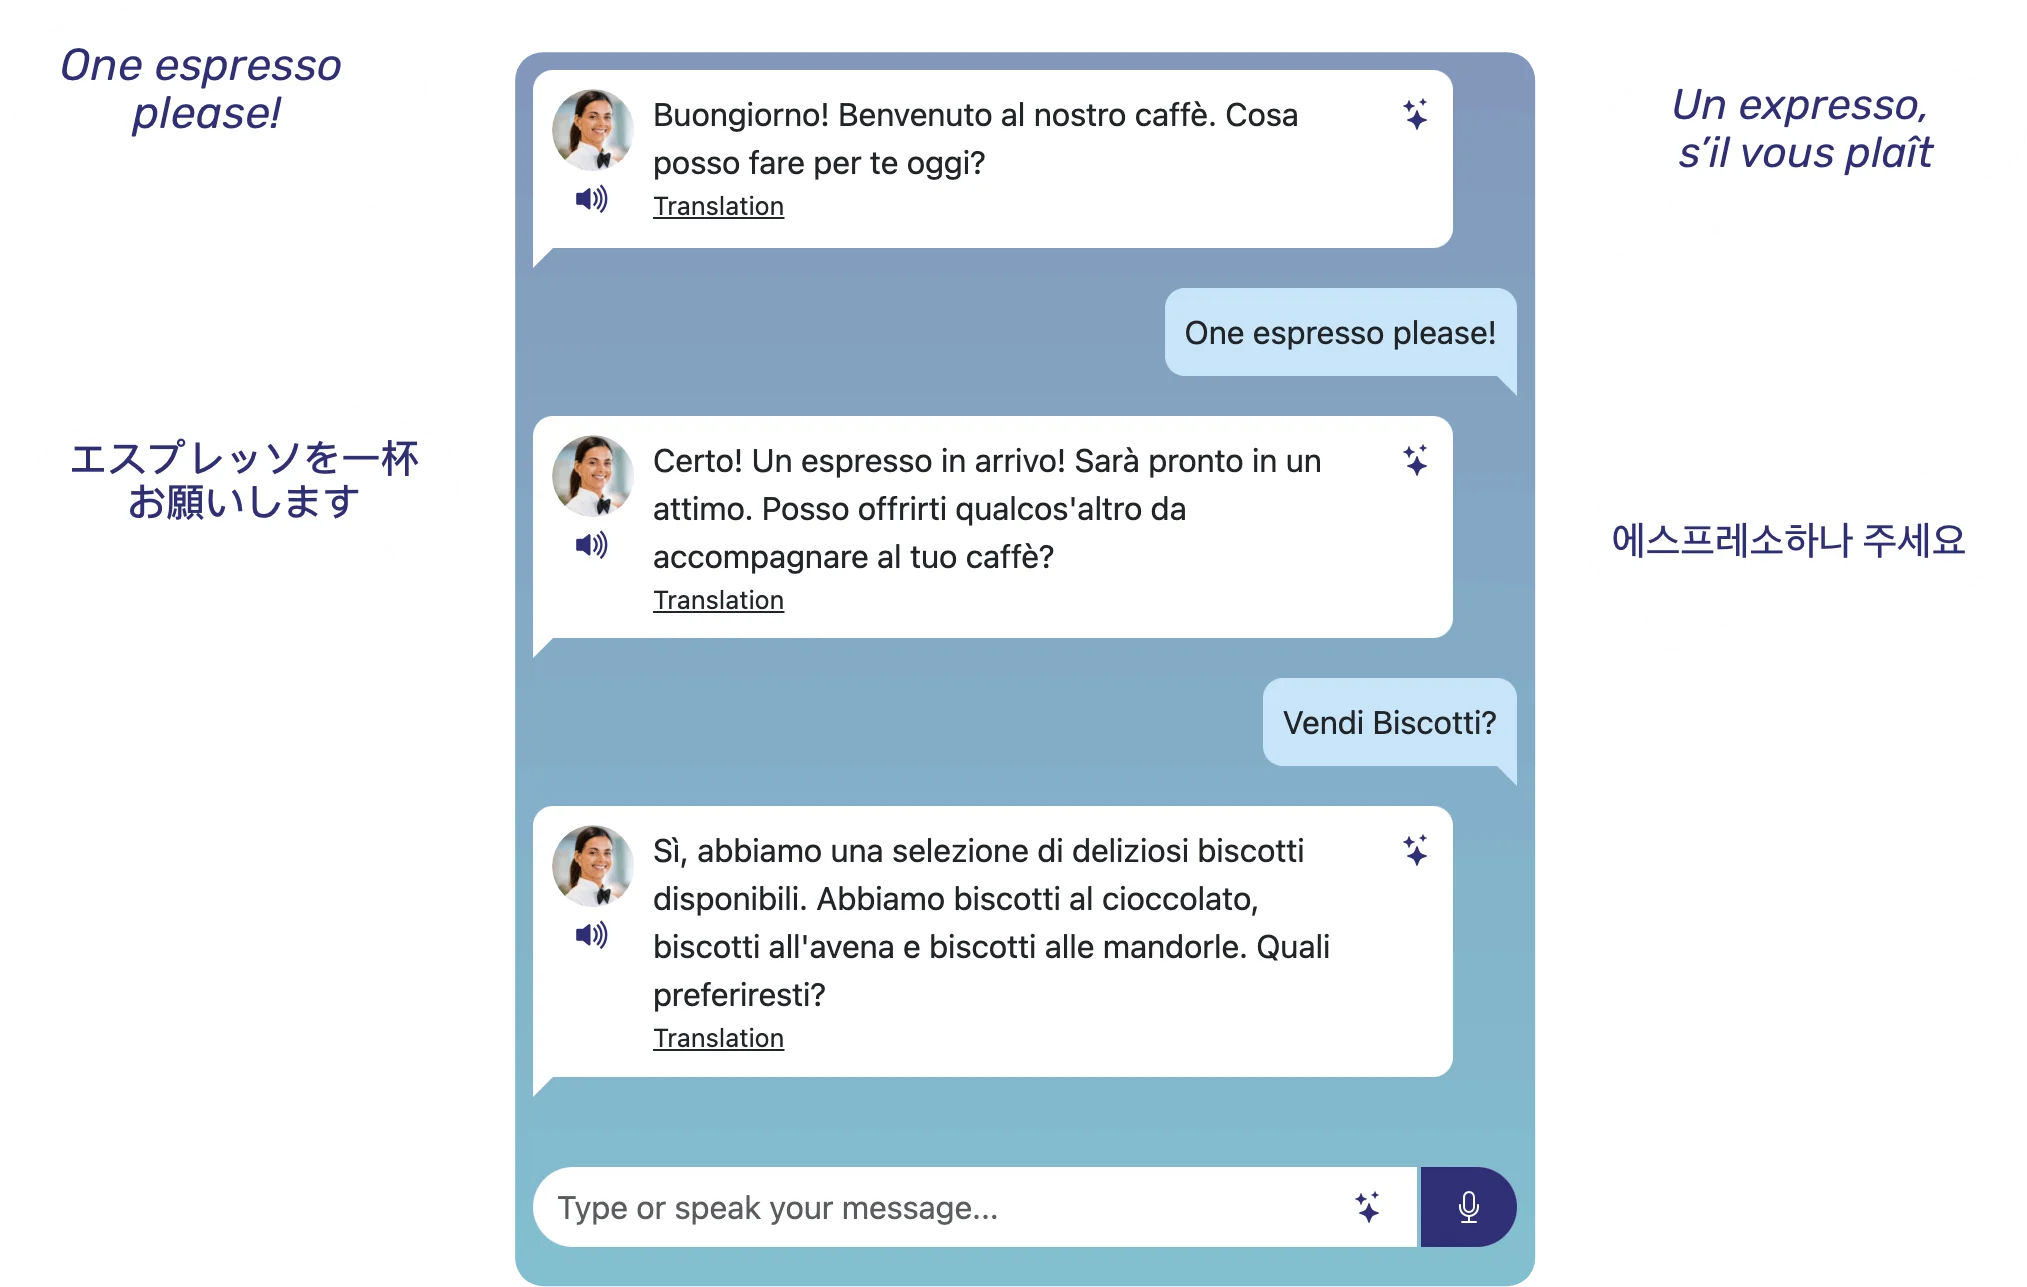 Interactive language practice chat interface showcasing conversations in Italian, Japanese, French, and Korean.